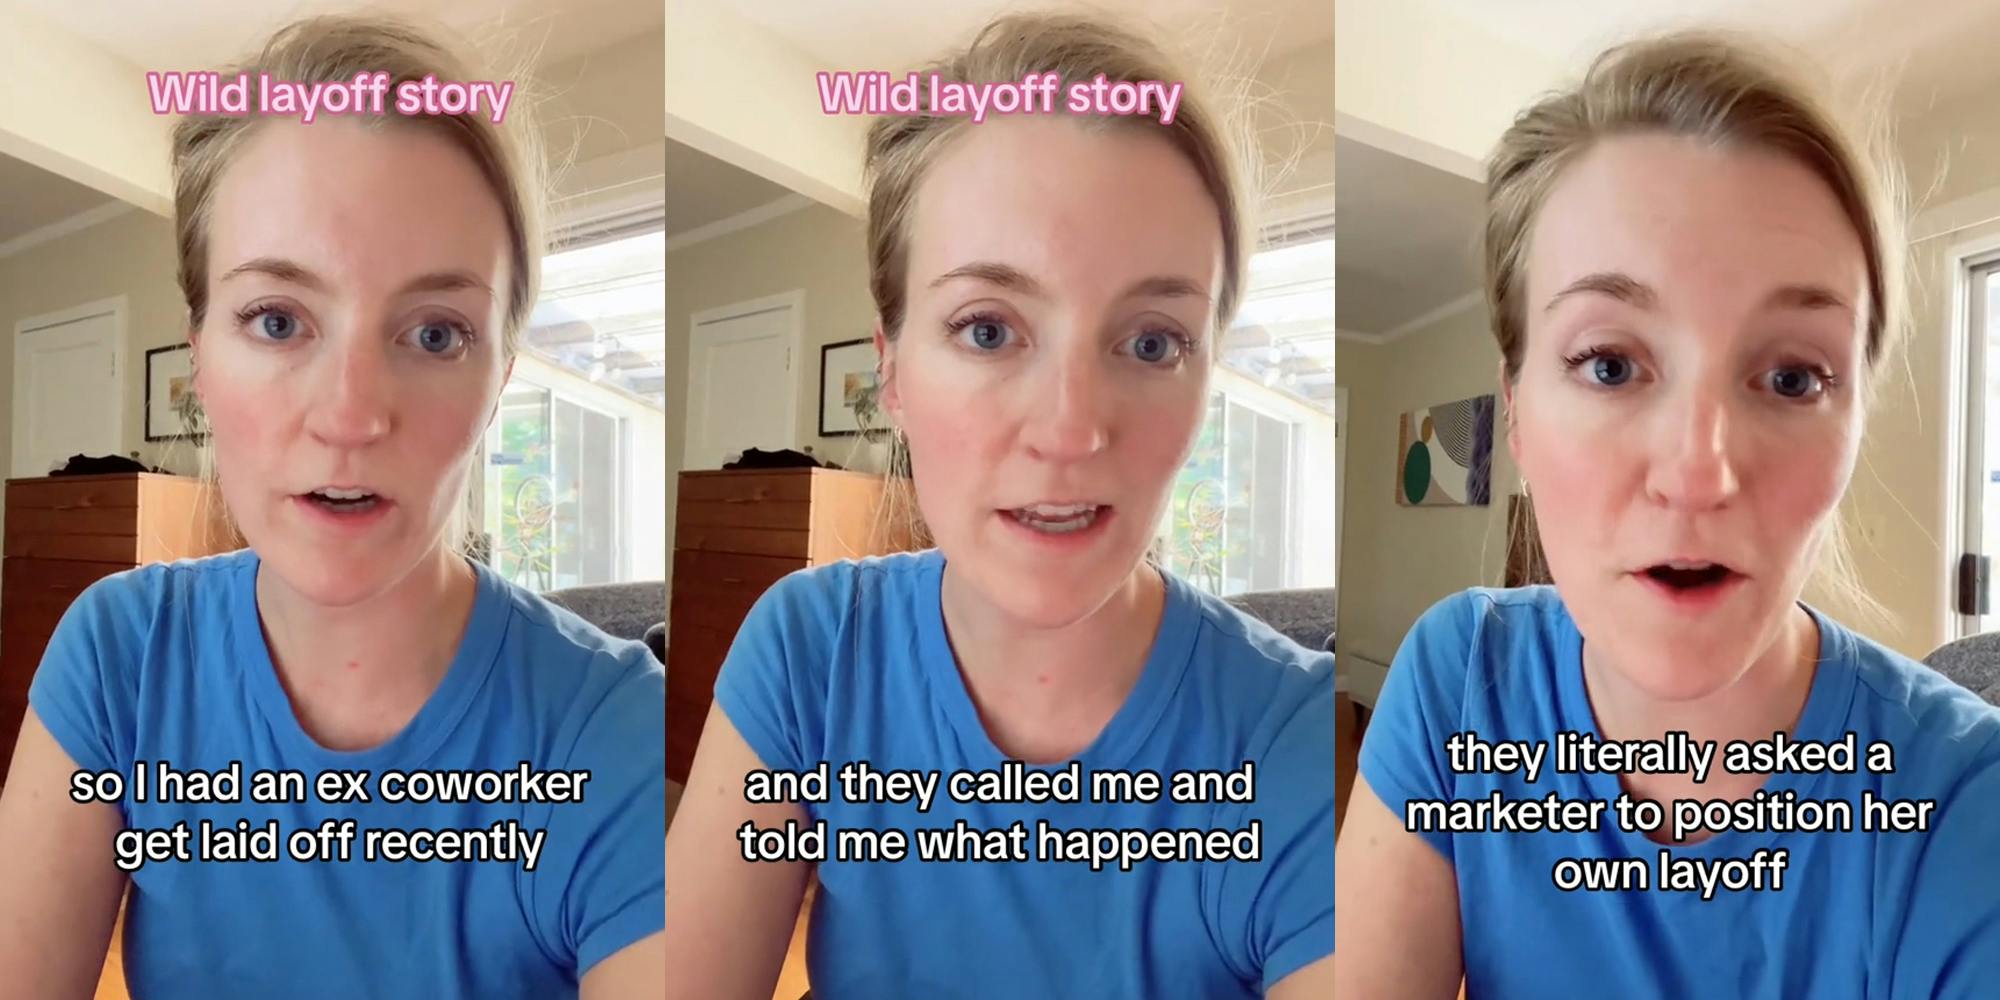 woman speaking with caption "Wild layoff story so I had an ex coworker get laid off recently" (l) woman speaking with caption "Wild layoff story and they called me and told me what happened" (c) woman speaking with caption "they literally asked a marketer to position her own layoff" (r)